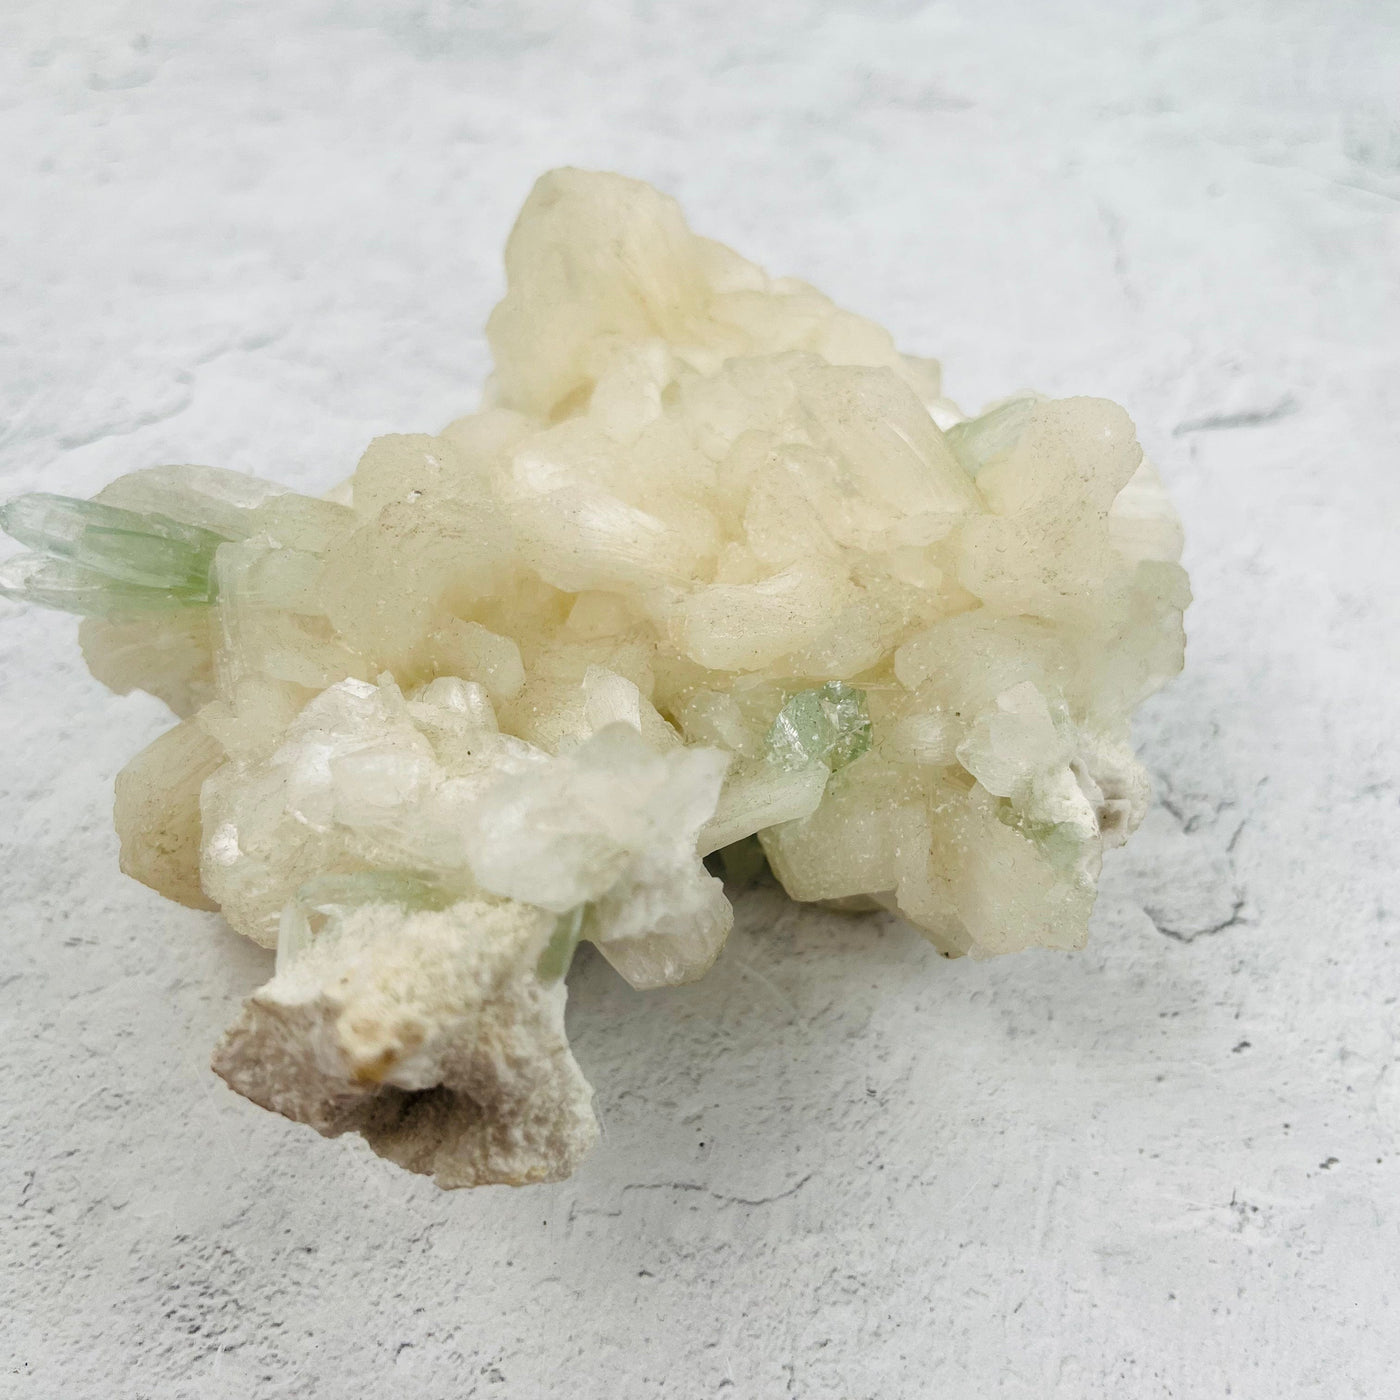 Green Apophyllite with Stilbite Crystal Clusters Zeolites - Front Side View